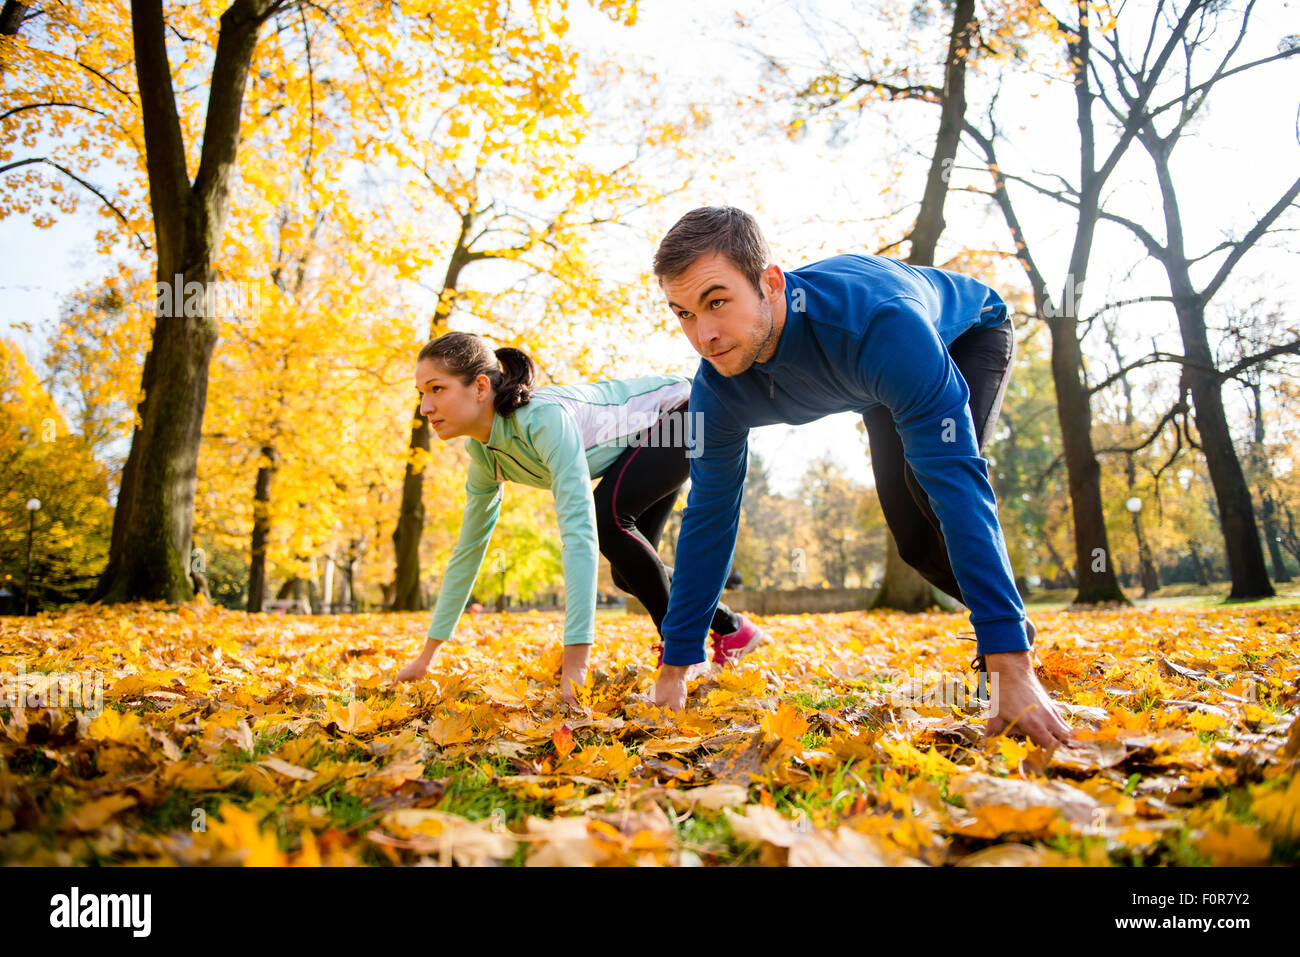 Young couple in steady position prepared for running in autumn nature Stock Photo